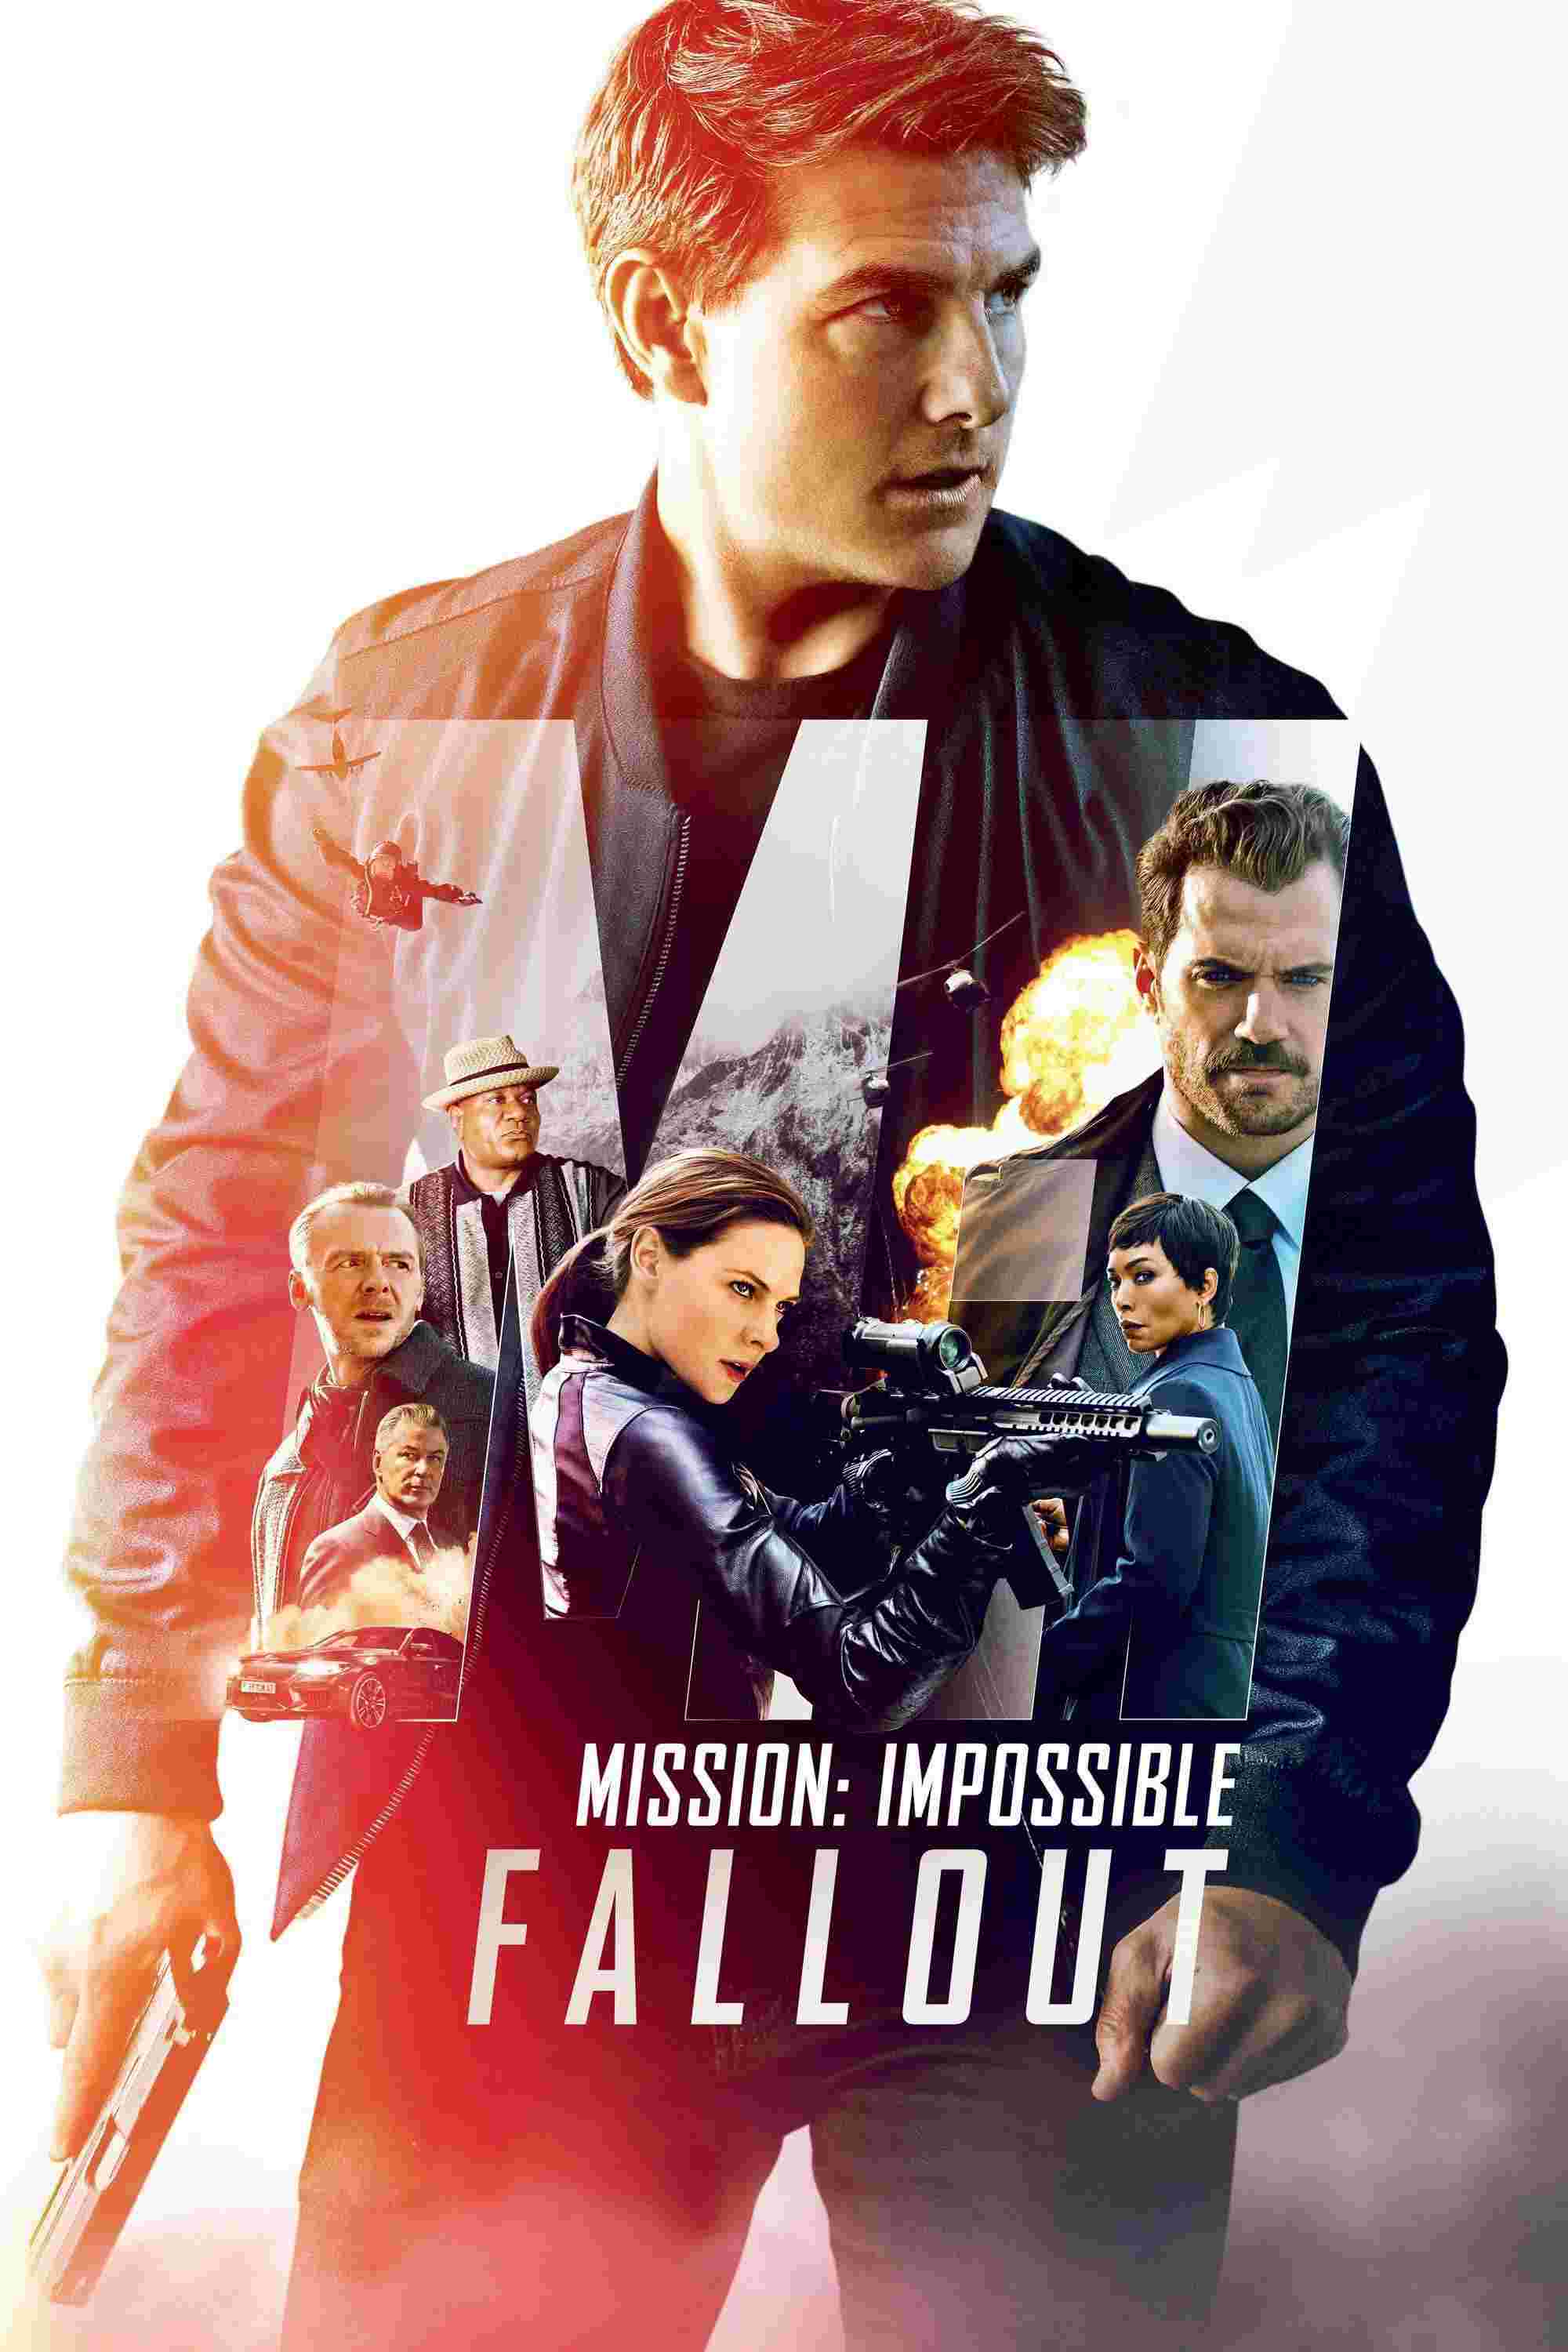 Mission: Impossible - Fallout (2018) Tom Cruise